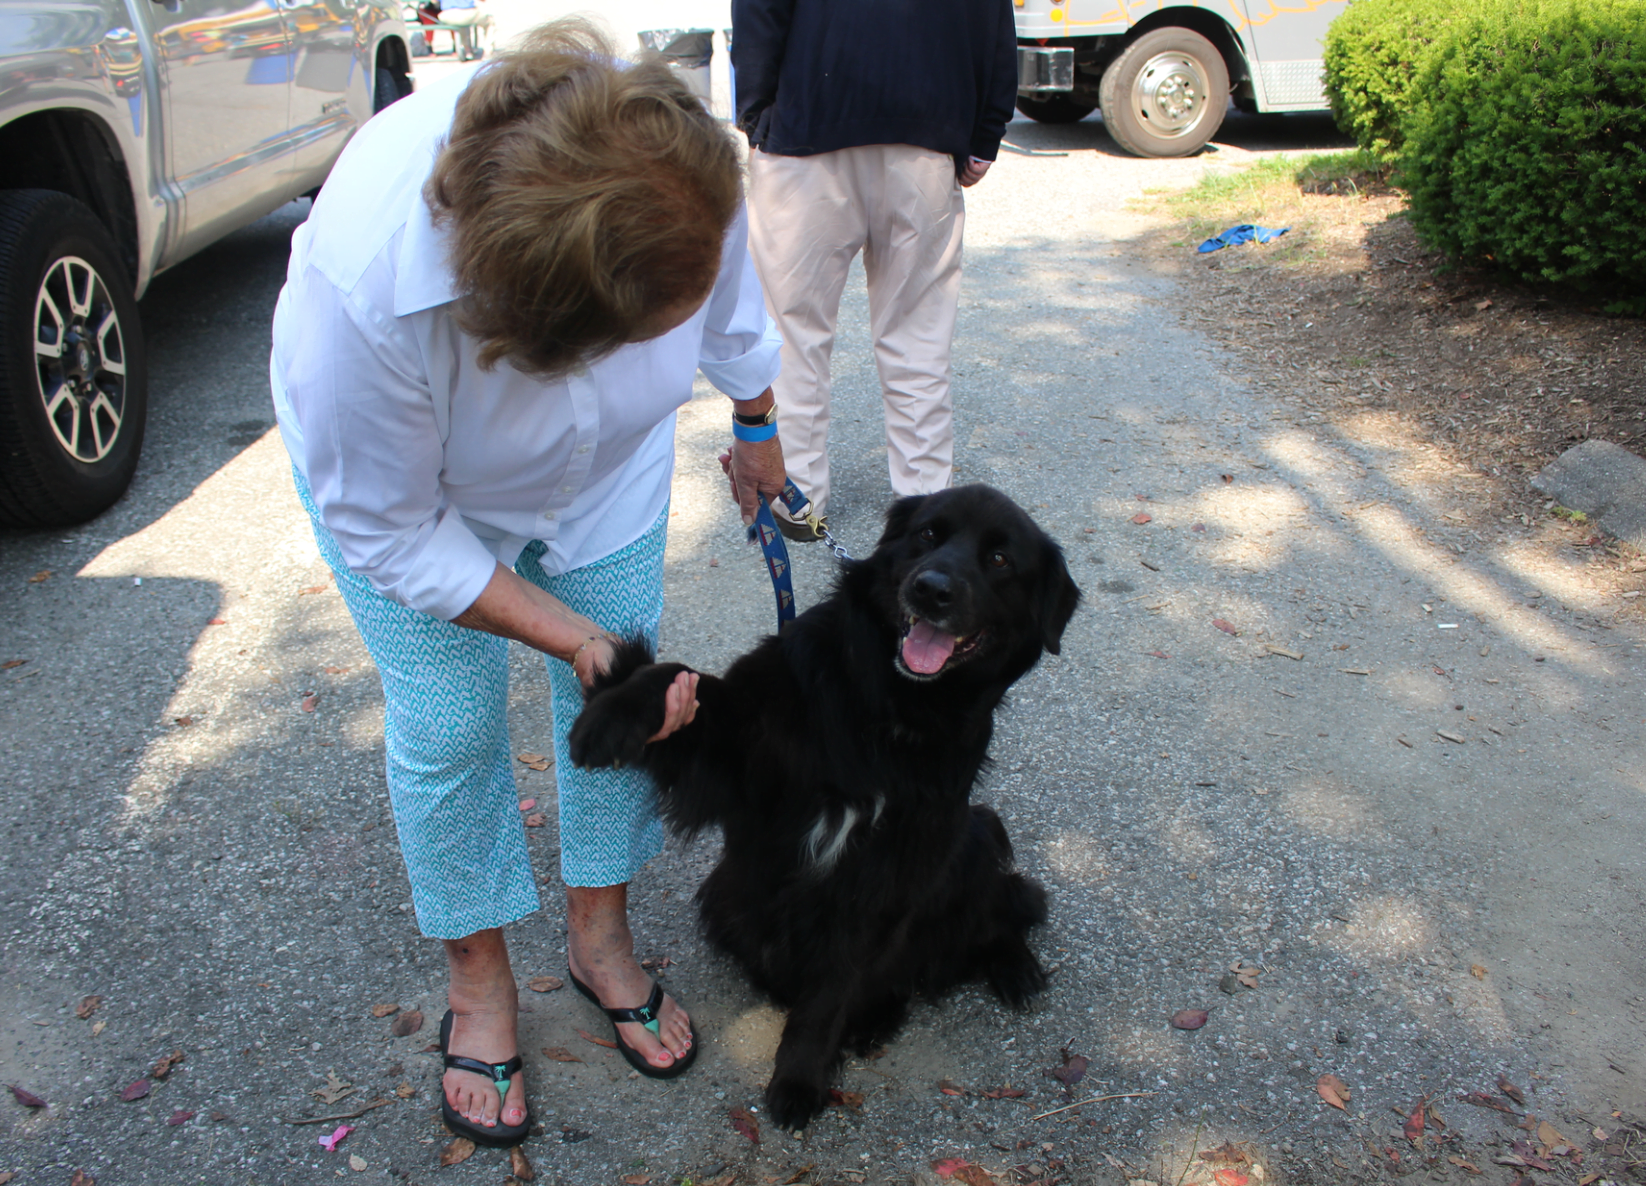 Oliver, who was adopted from Adopt a Dog four years go, shakes Mary Hull's hand at Puttin' on the Dog. Sept 17, 2017 Photo: Leslie Yager